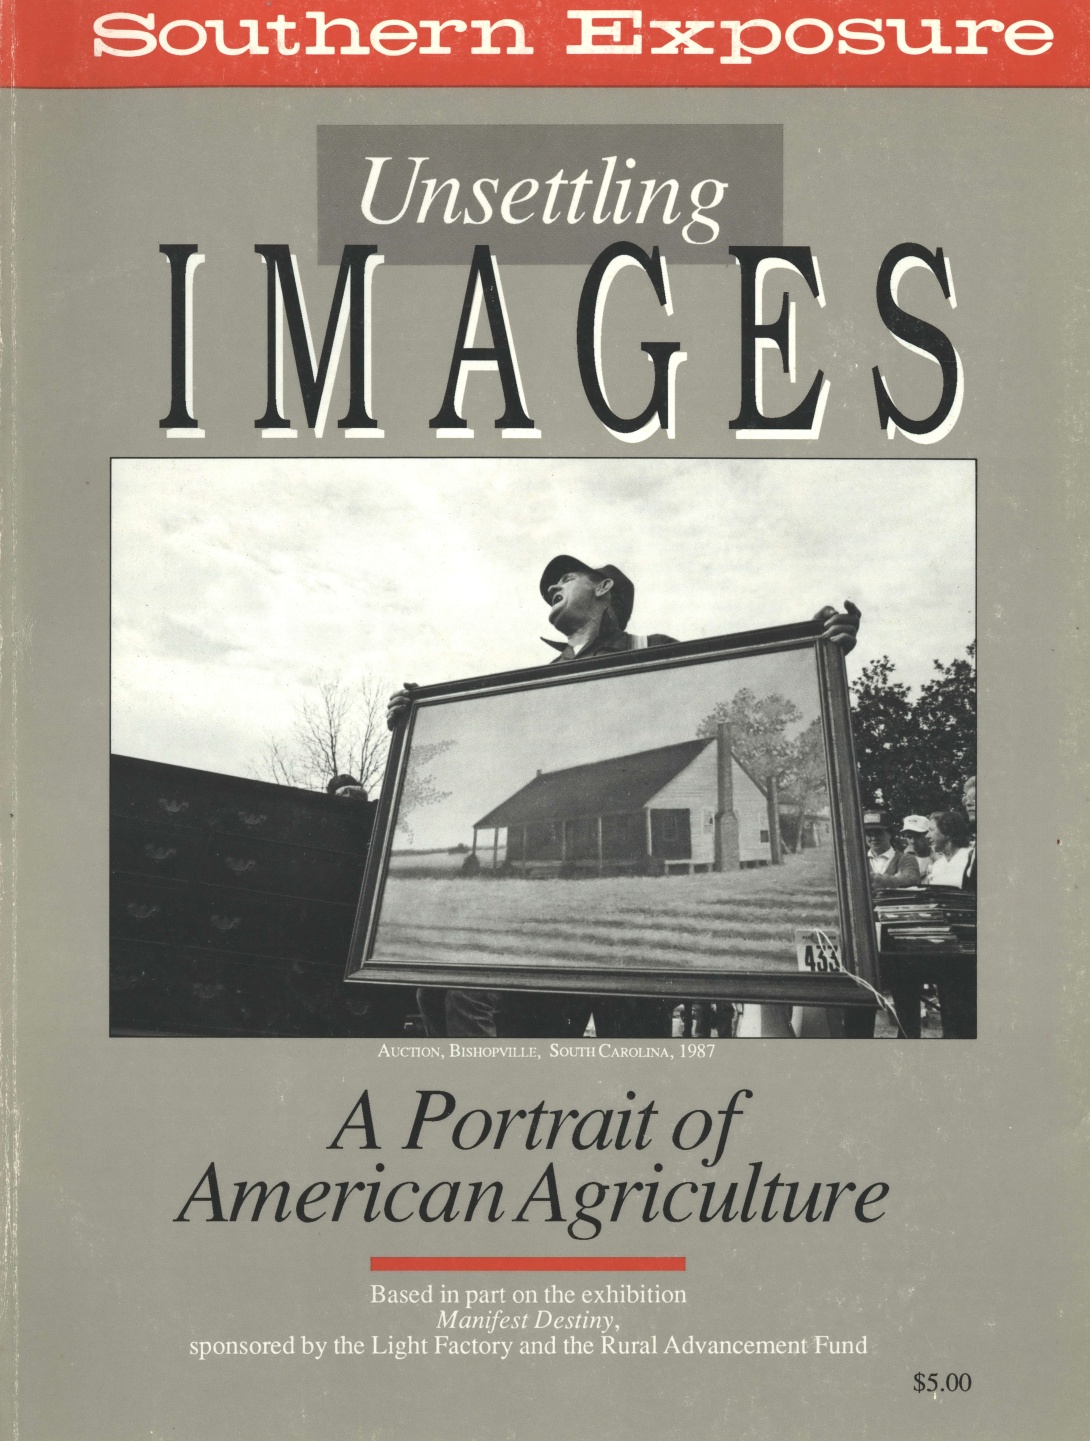 Magazine cover reading "Unsettling Images" with photo of man holding painting